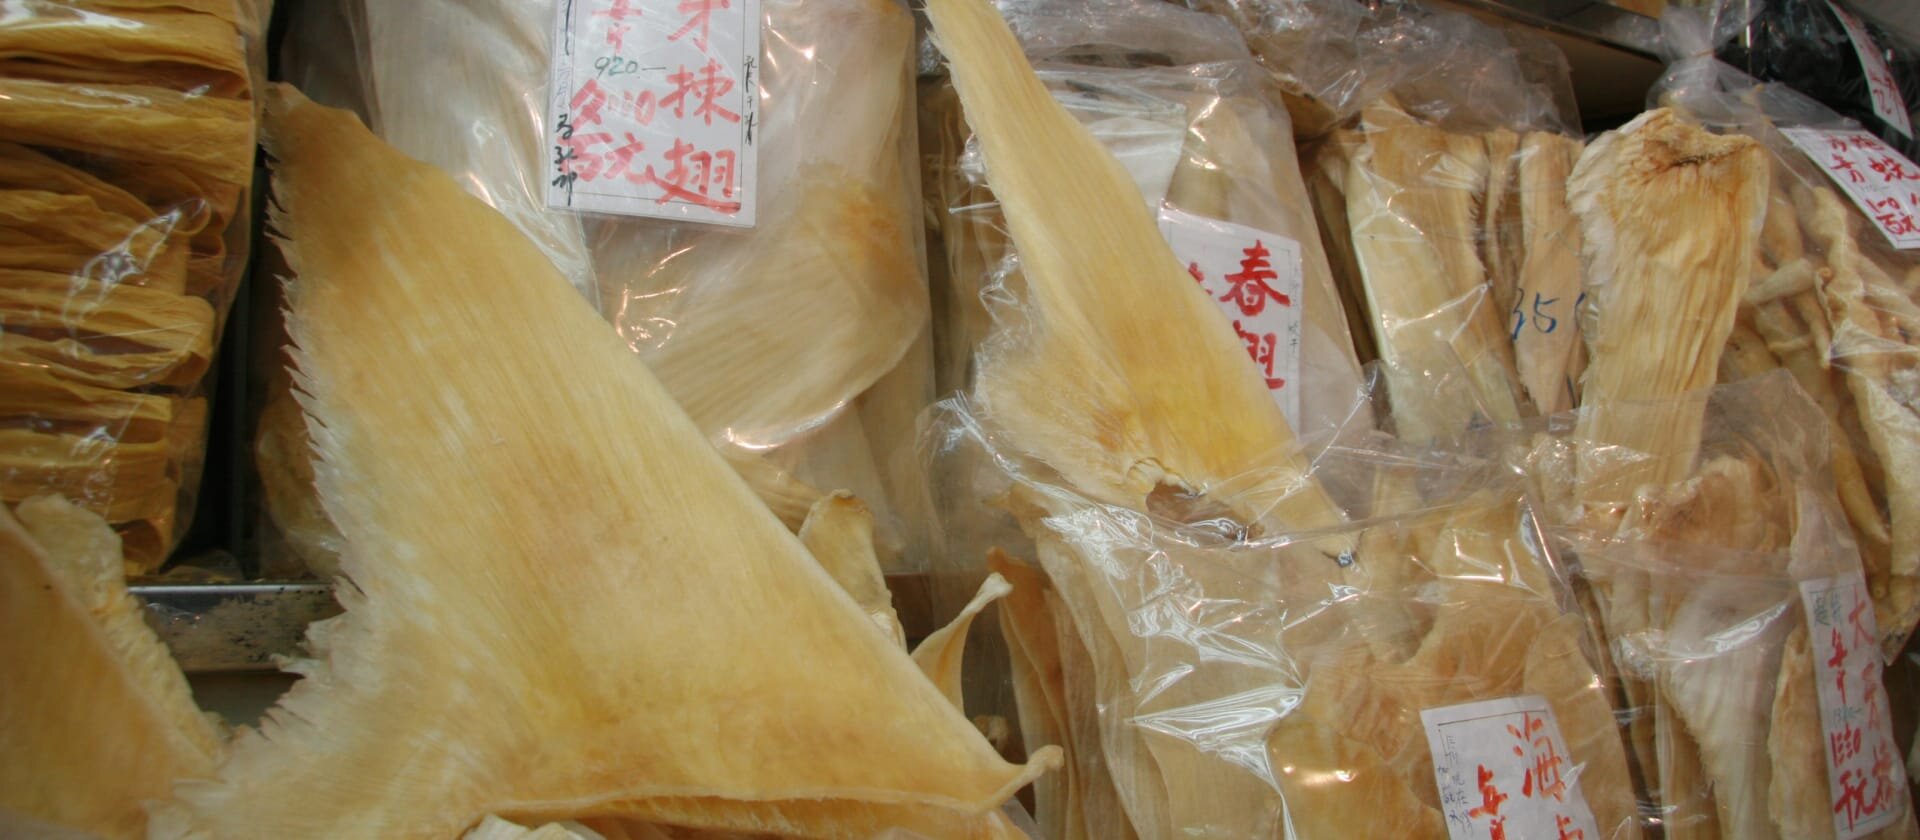 Mercury levels in shark fins illegal and dangerous to human health